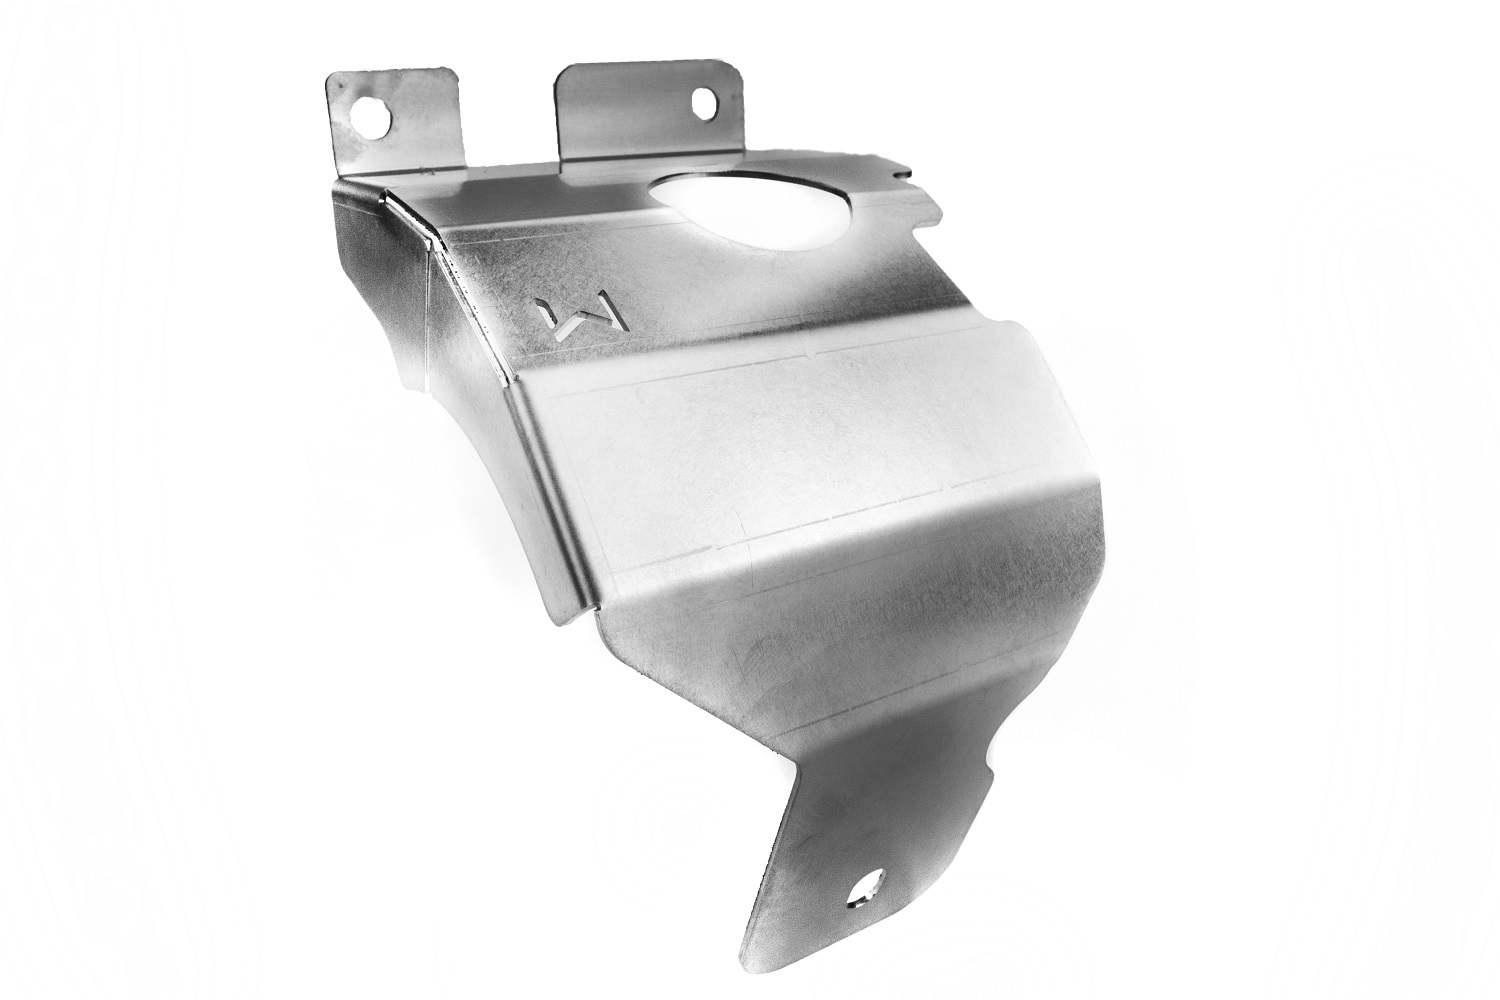 New T304 Stainless Steel heat shield is included